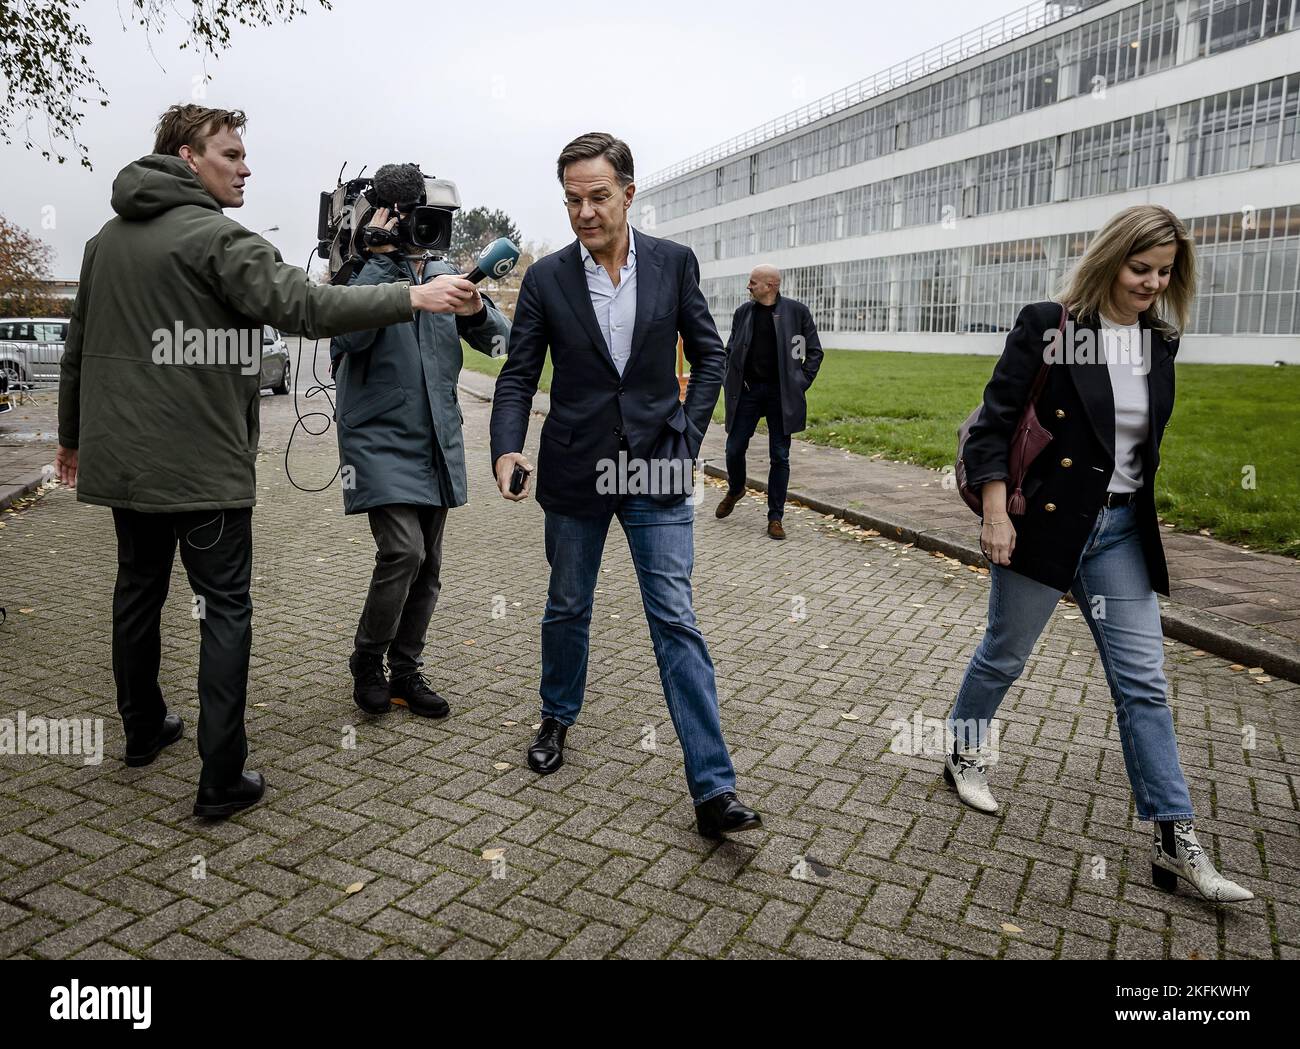 ROTTERDAM - Mark Rutte (VVD) arrives at the Van Nelle Factory prior to the autumn congress of the VVD. ANP REMKO DE WAAL netherlands out - belgium out Stock Photo